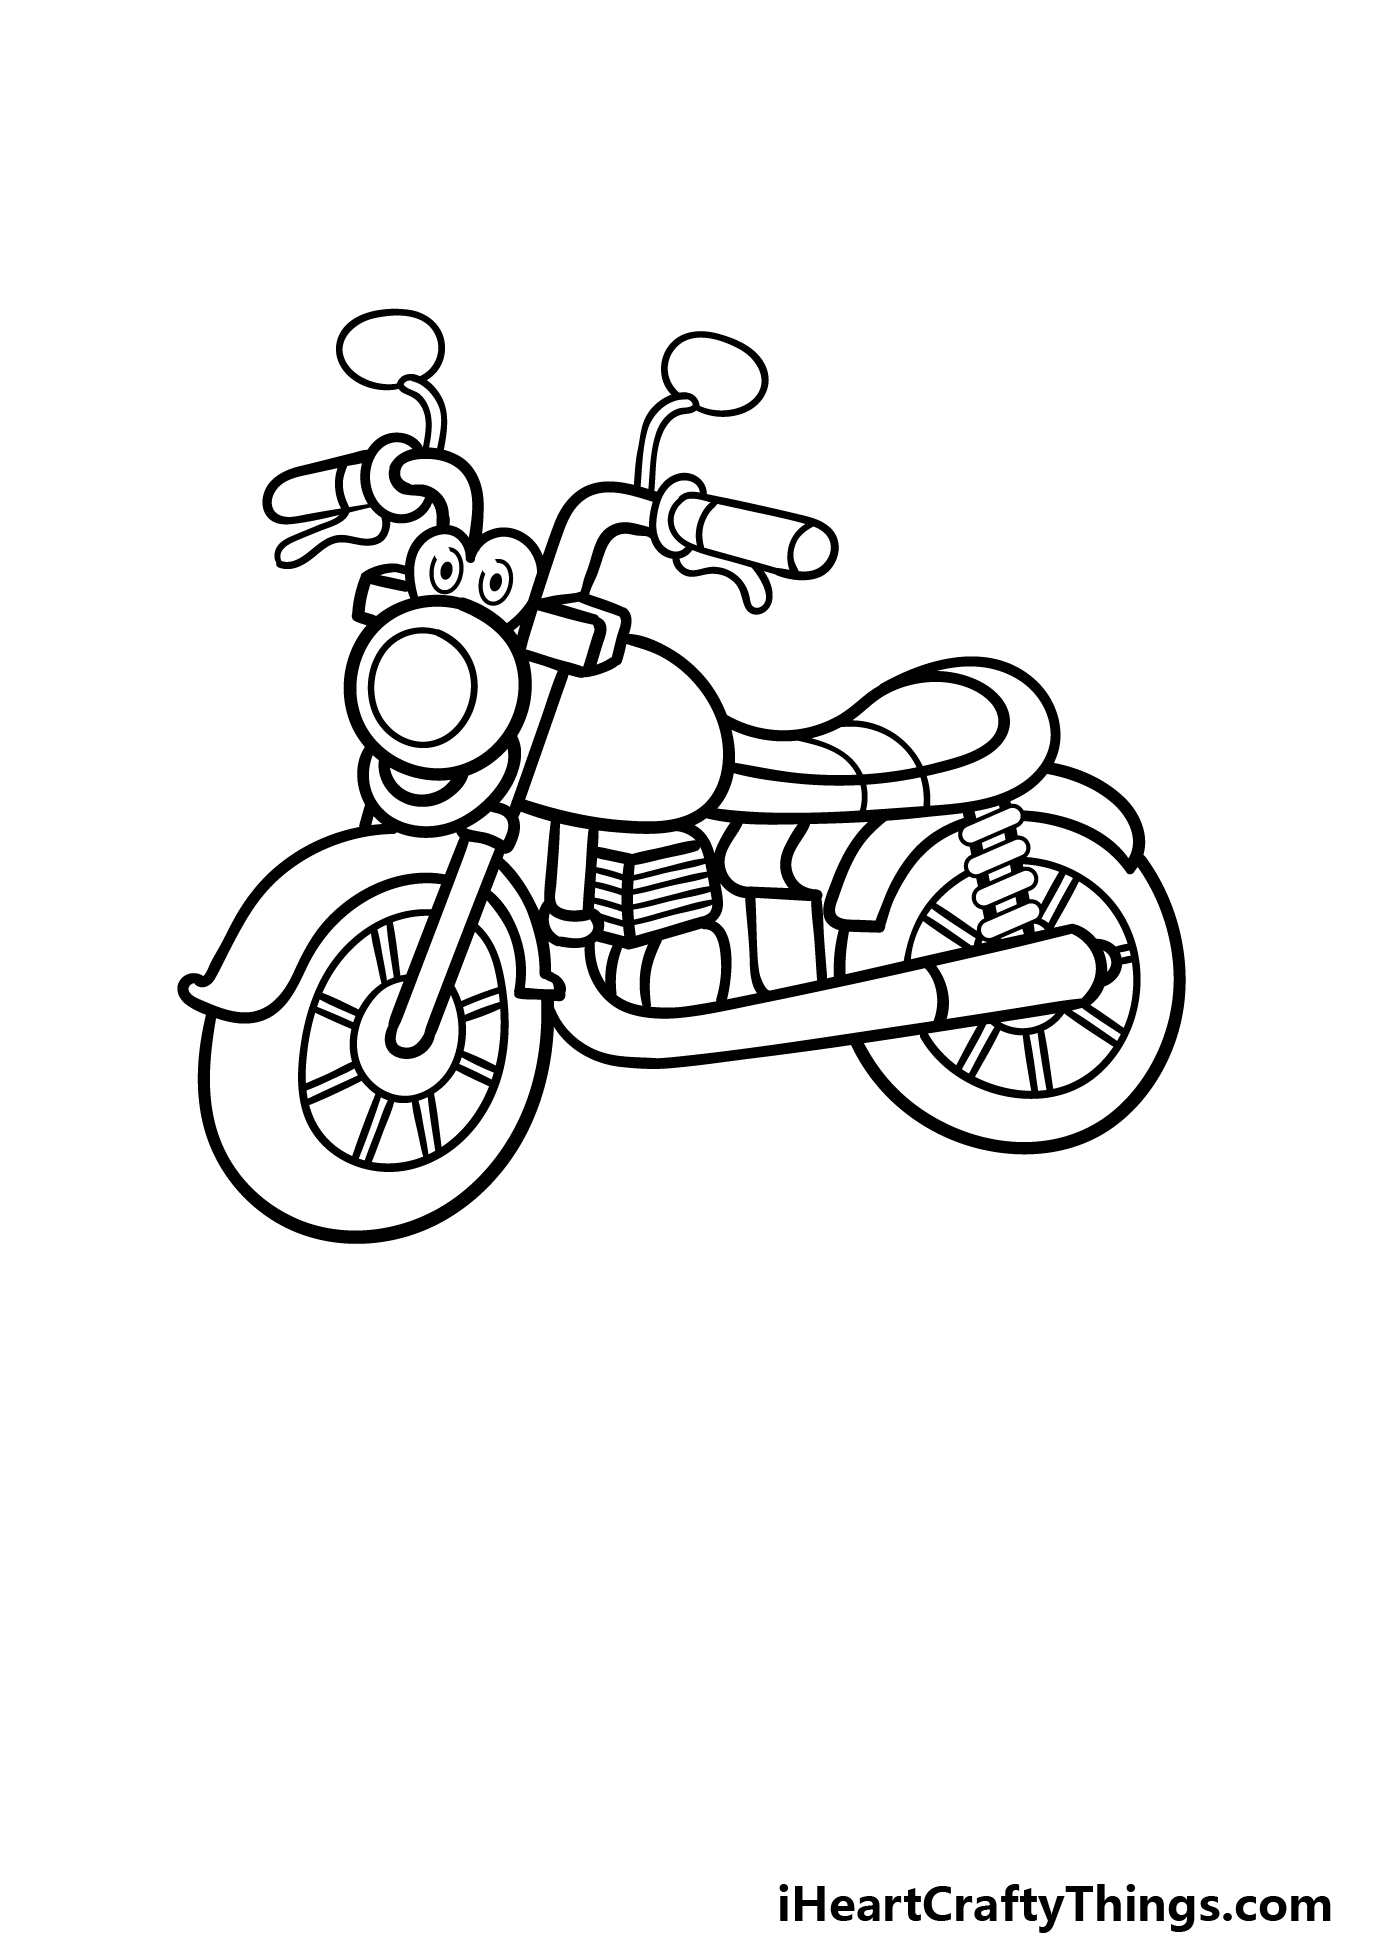 Cartoon Motorcycle Drawing - How To Draw A Cartoon Motorcycle Step By Step